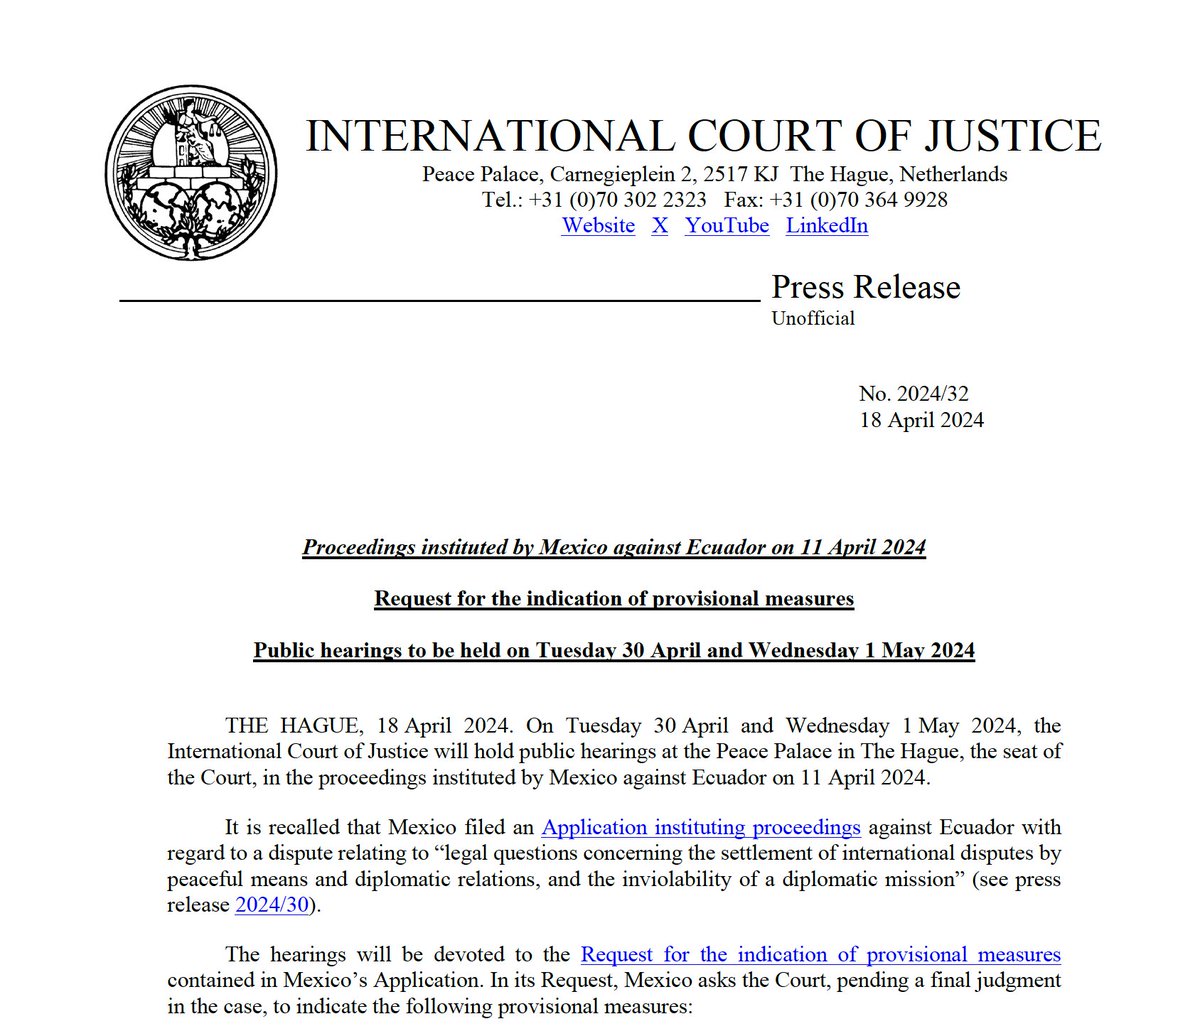 ICJ schedules public hearings on Mexico's request for the indication of provisional measures against Ecuador for 30 April and 1 May: icj-cij.org/sites/default/…